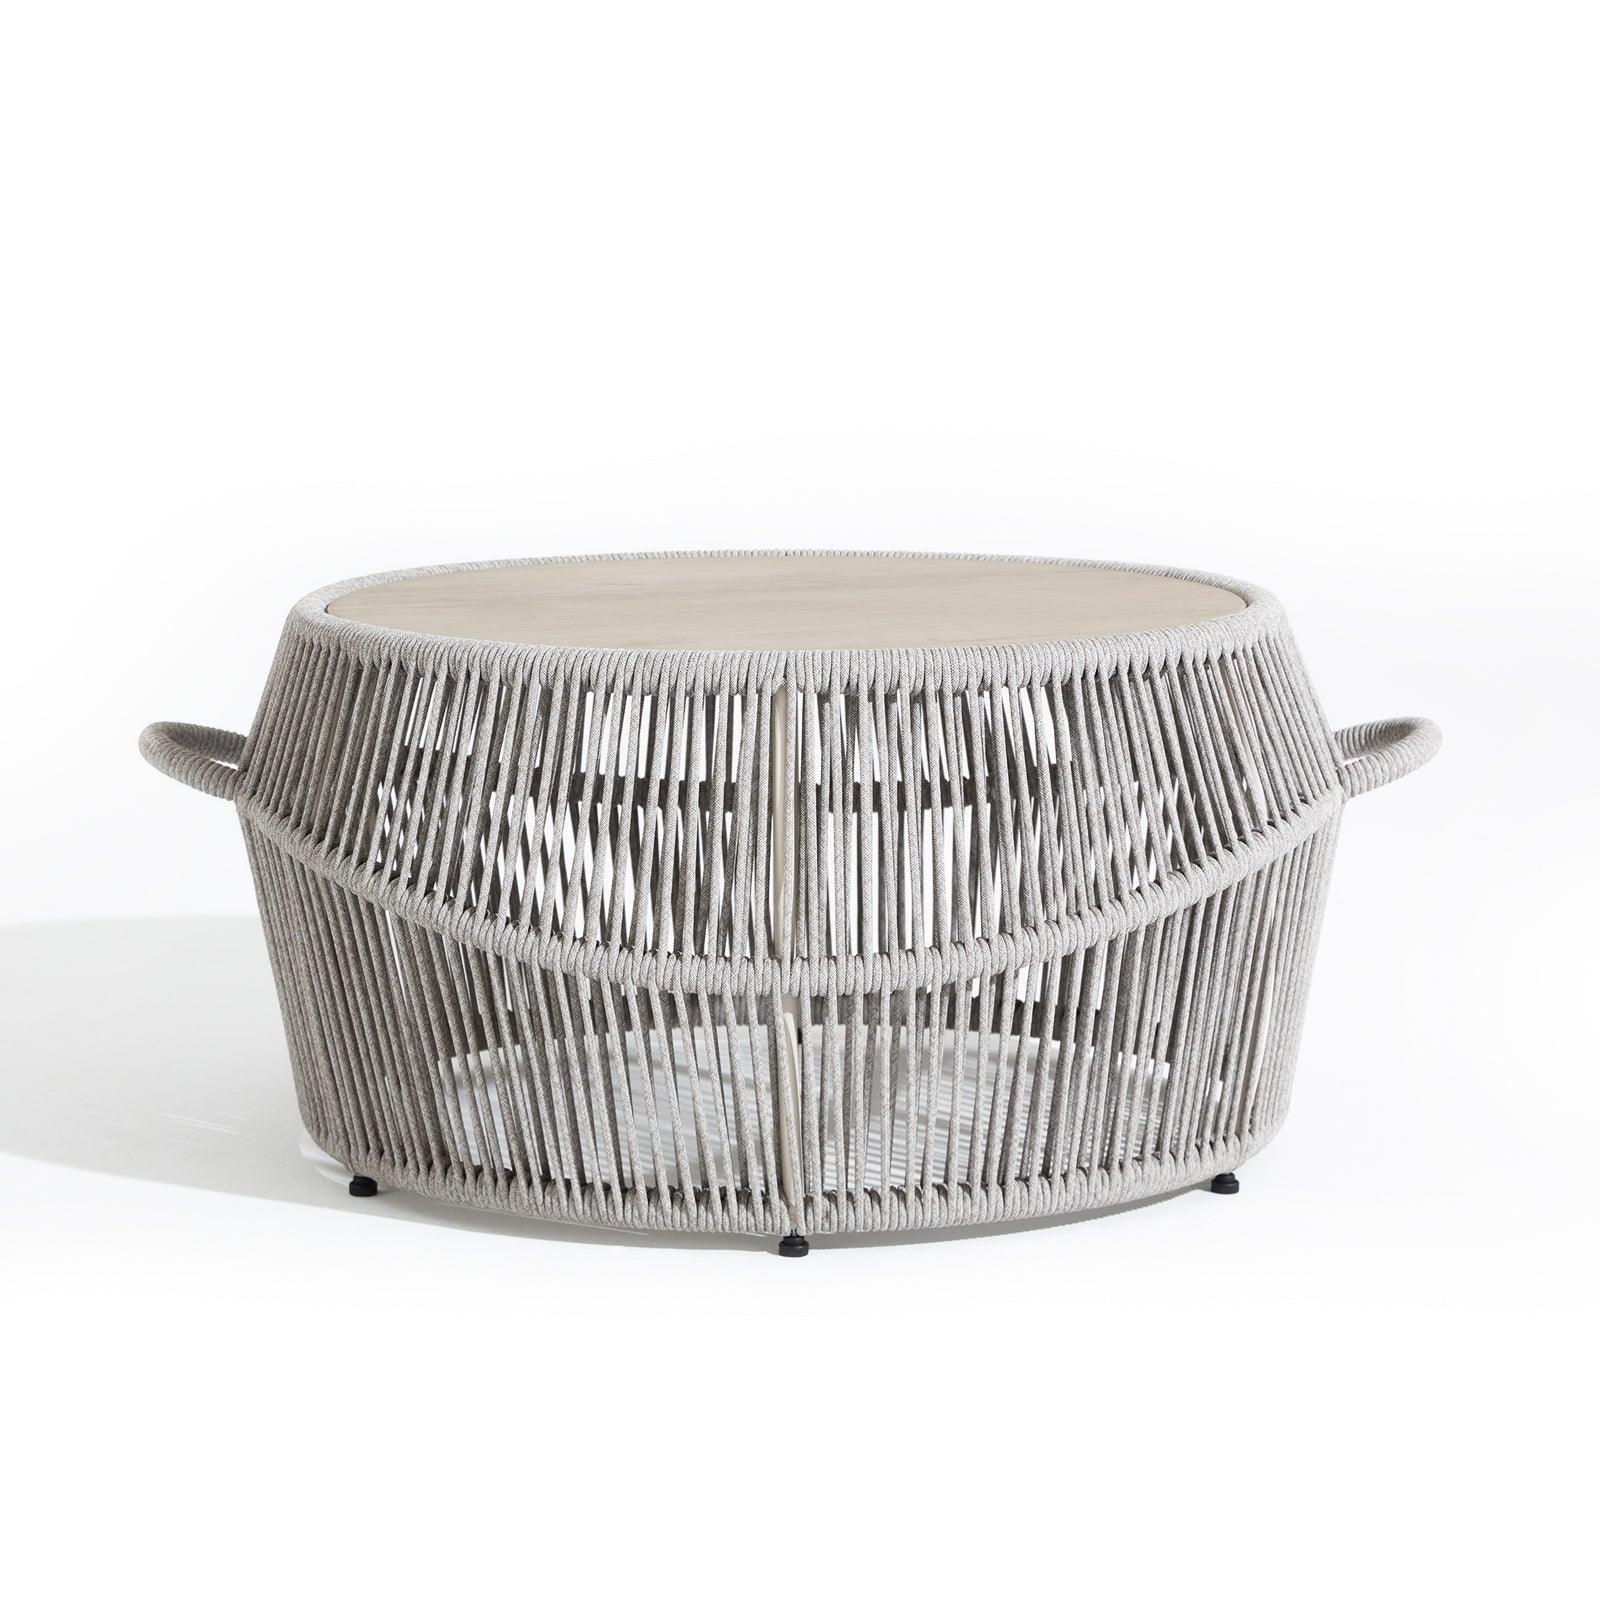 Natural - Table, rope design, natural ceramic tabletop, a part from Sectional Set - Sunsitt Signature